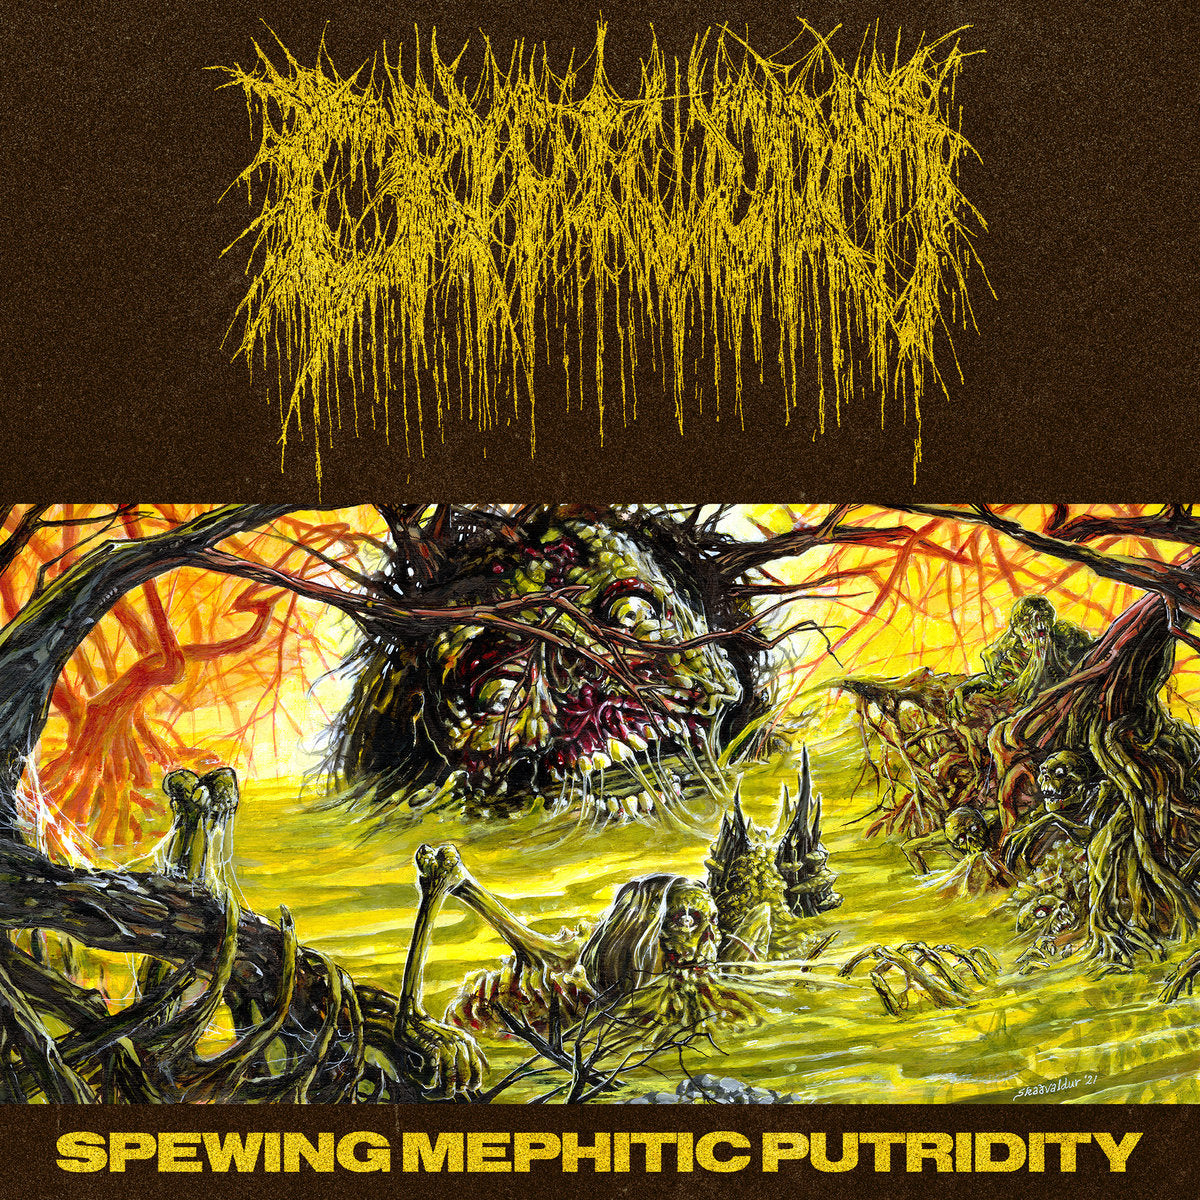 CRYPTWORM "Spewing Mephitic Putridity" LP